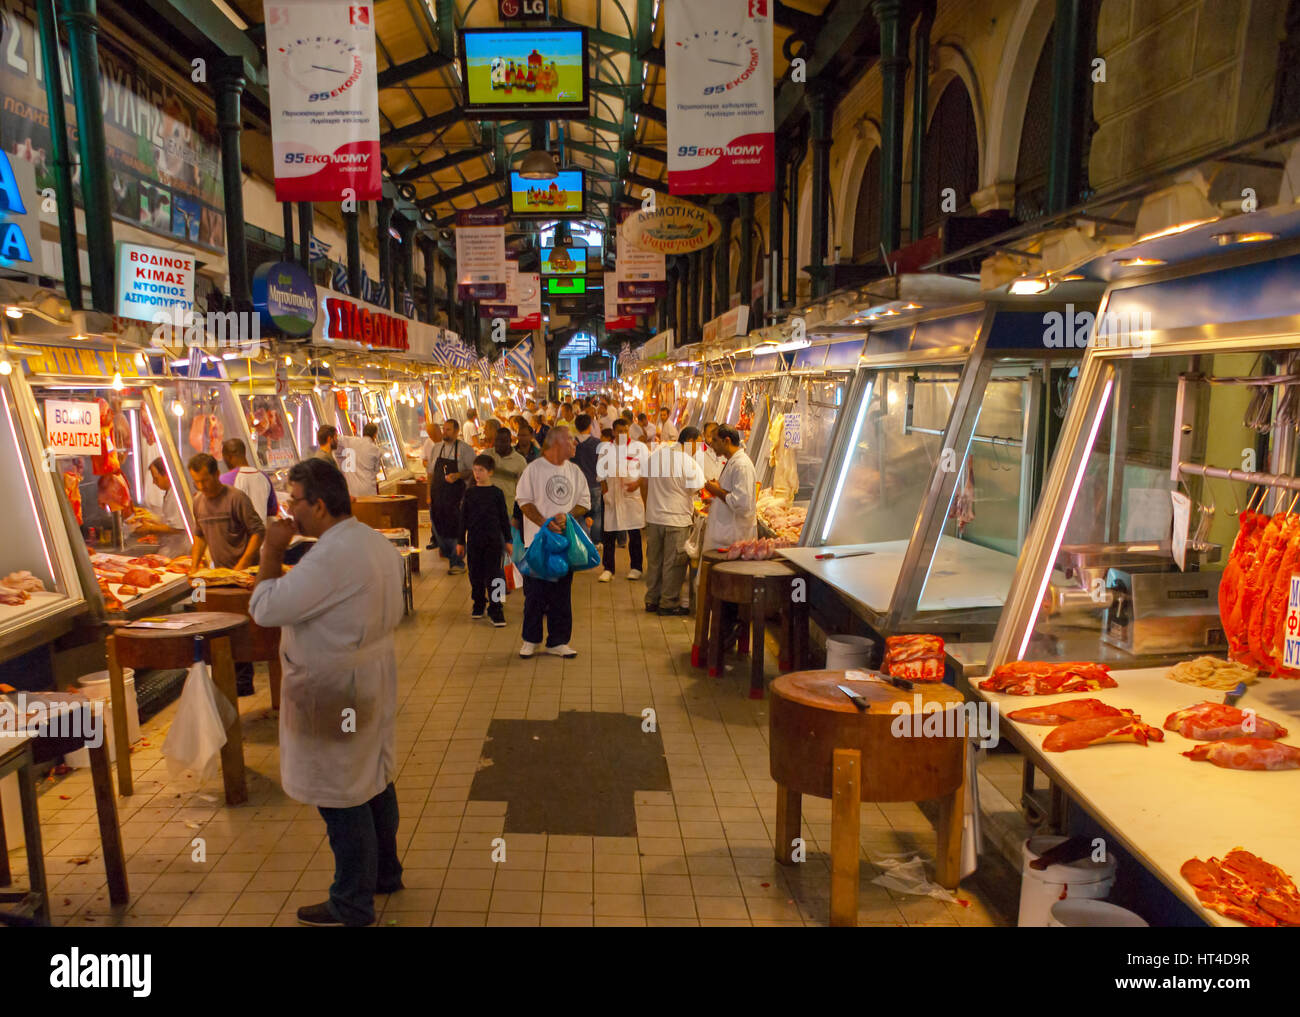 ATHENS, GREECE - OCTOBER 12, 2013: The  central market's butchery is a popular among locals and tourists, on October 12 in Athens Stock Photo